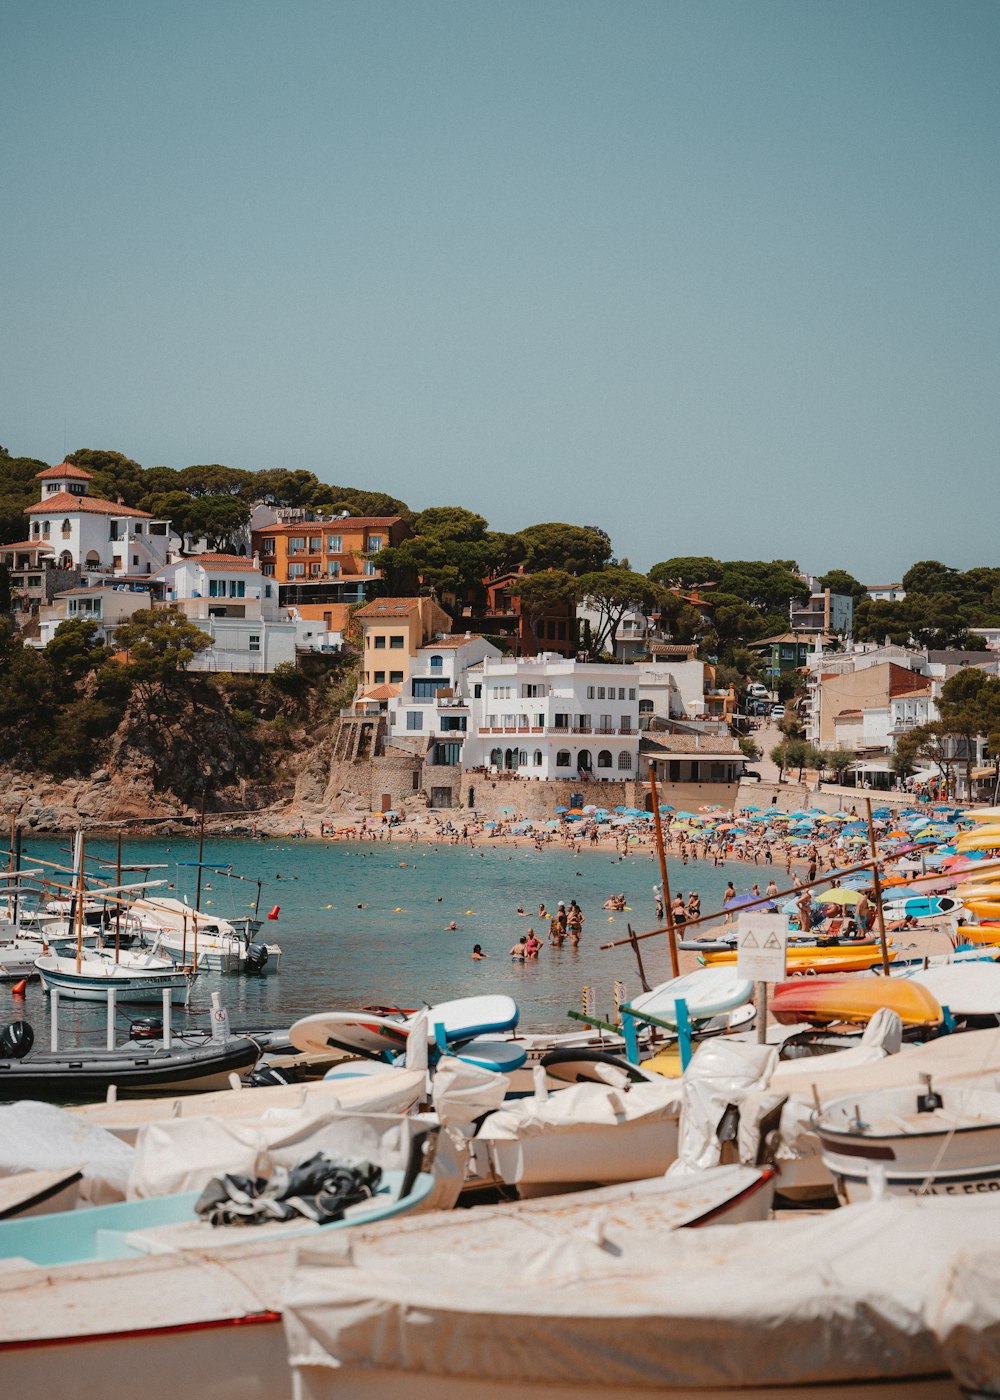 a beach with boats and people